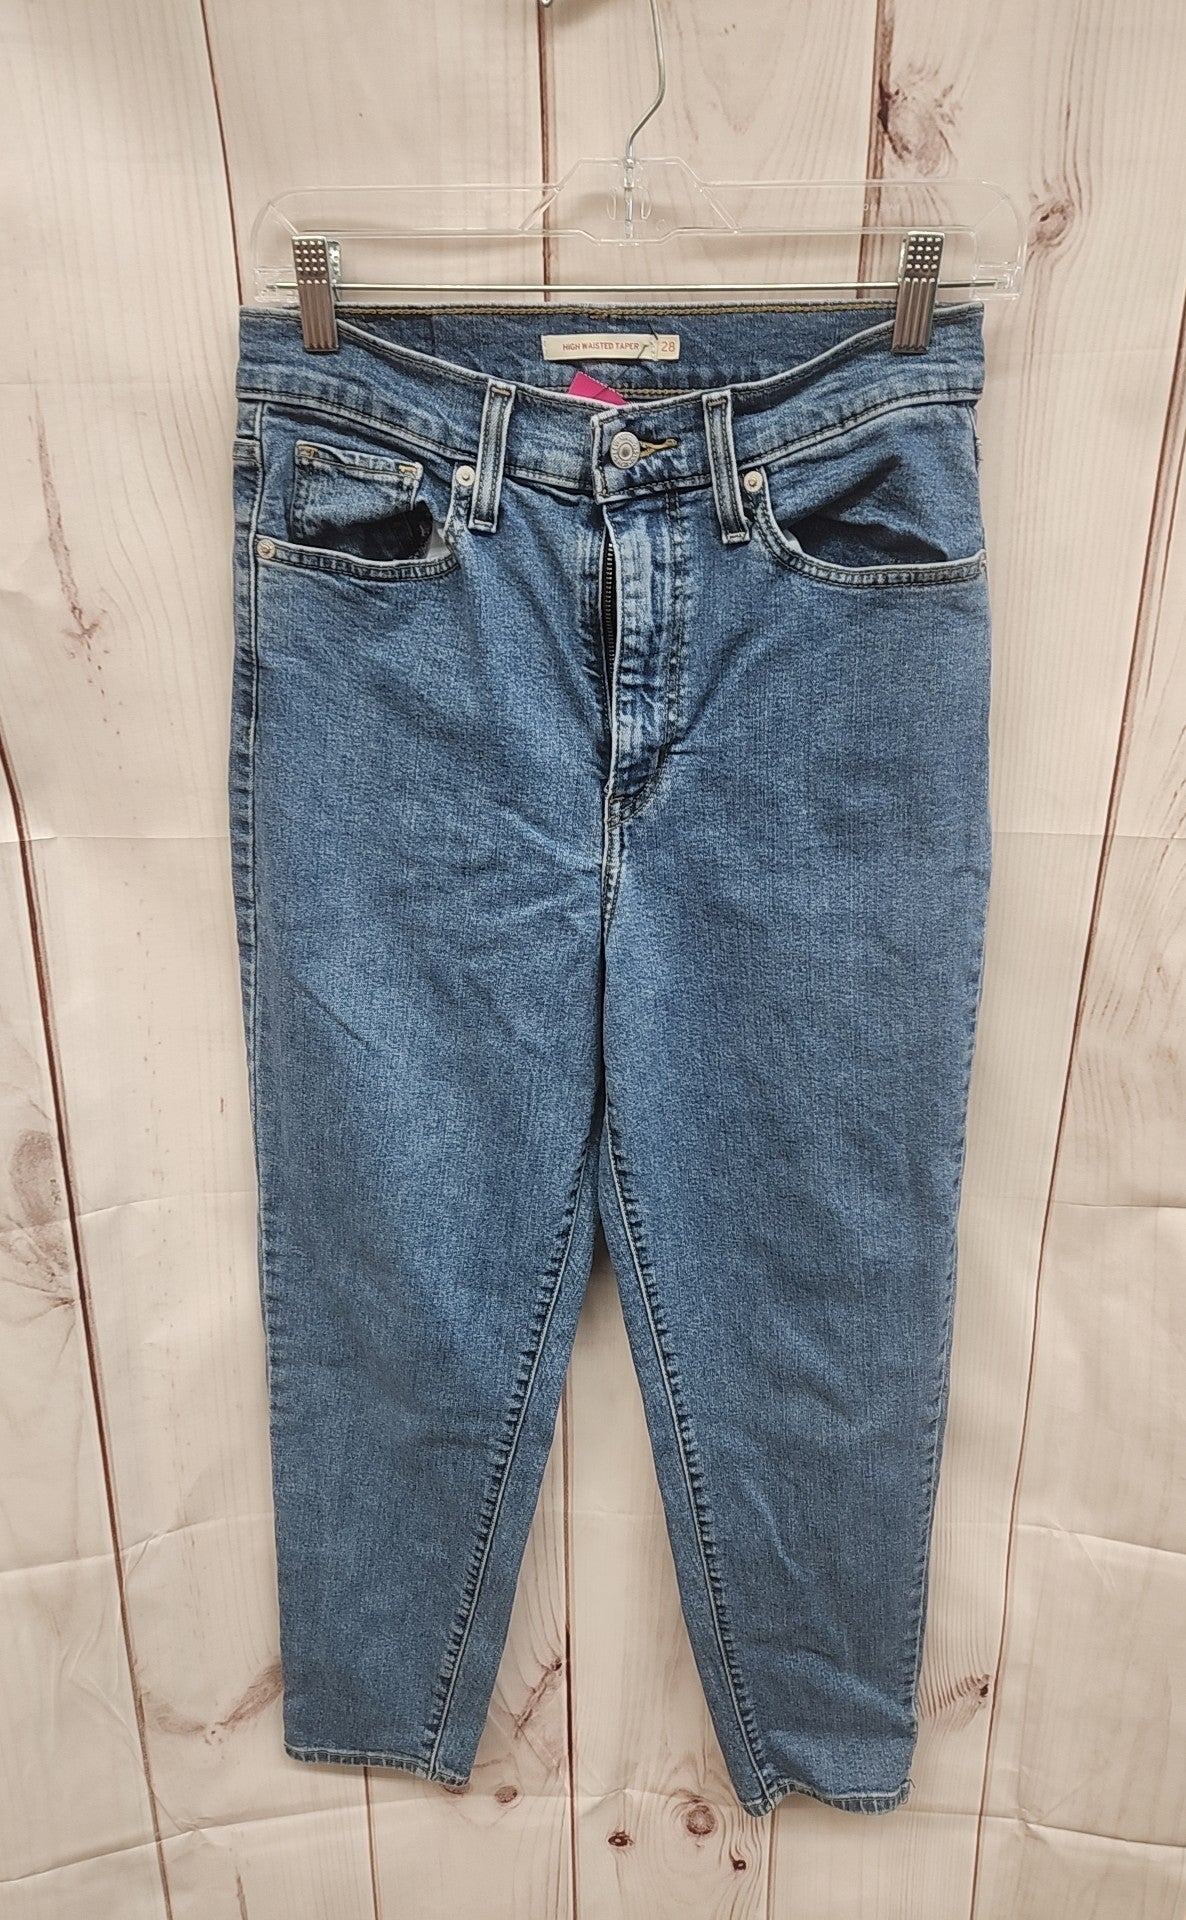 Levis Women's Size 28 (5-6) High Waisted Taper Blue Jeans